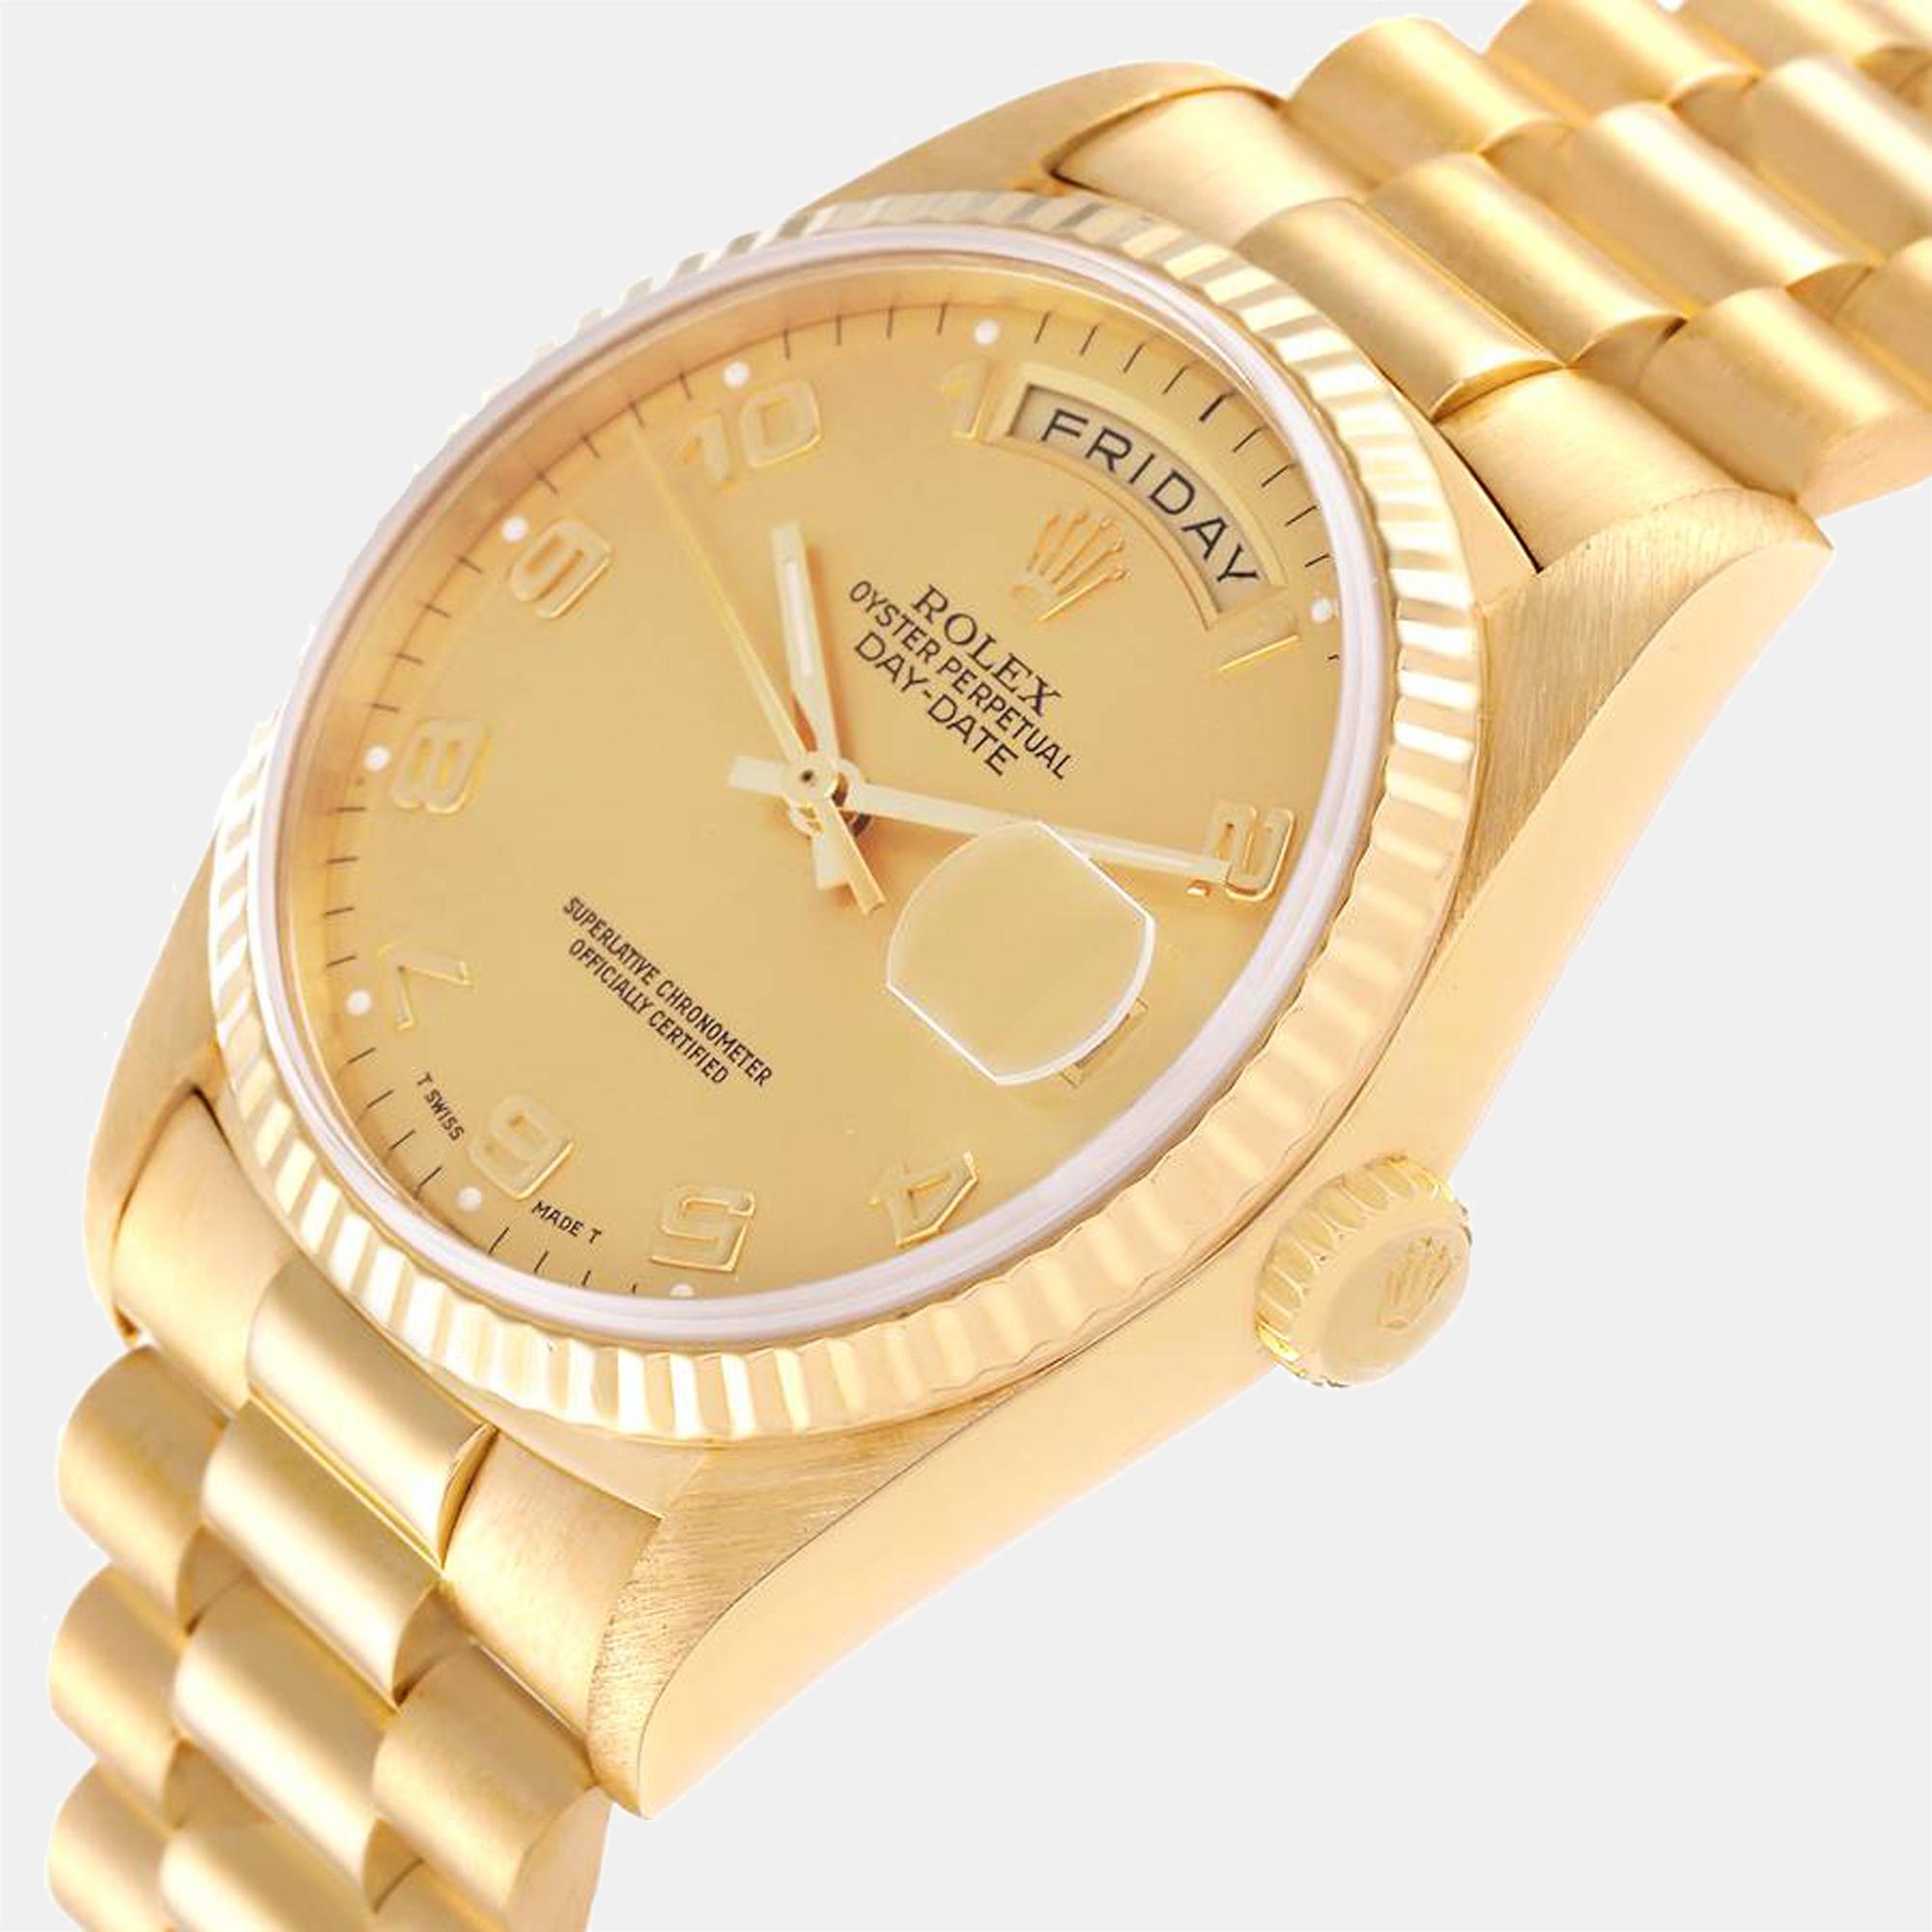 

Rolex Champagne 18K Yellow Gold President Day-Date 18238 Automatic Men's Wristwatch 36 mm